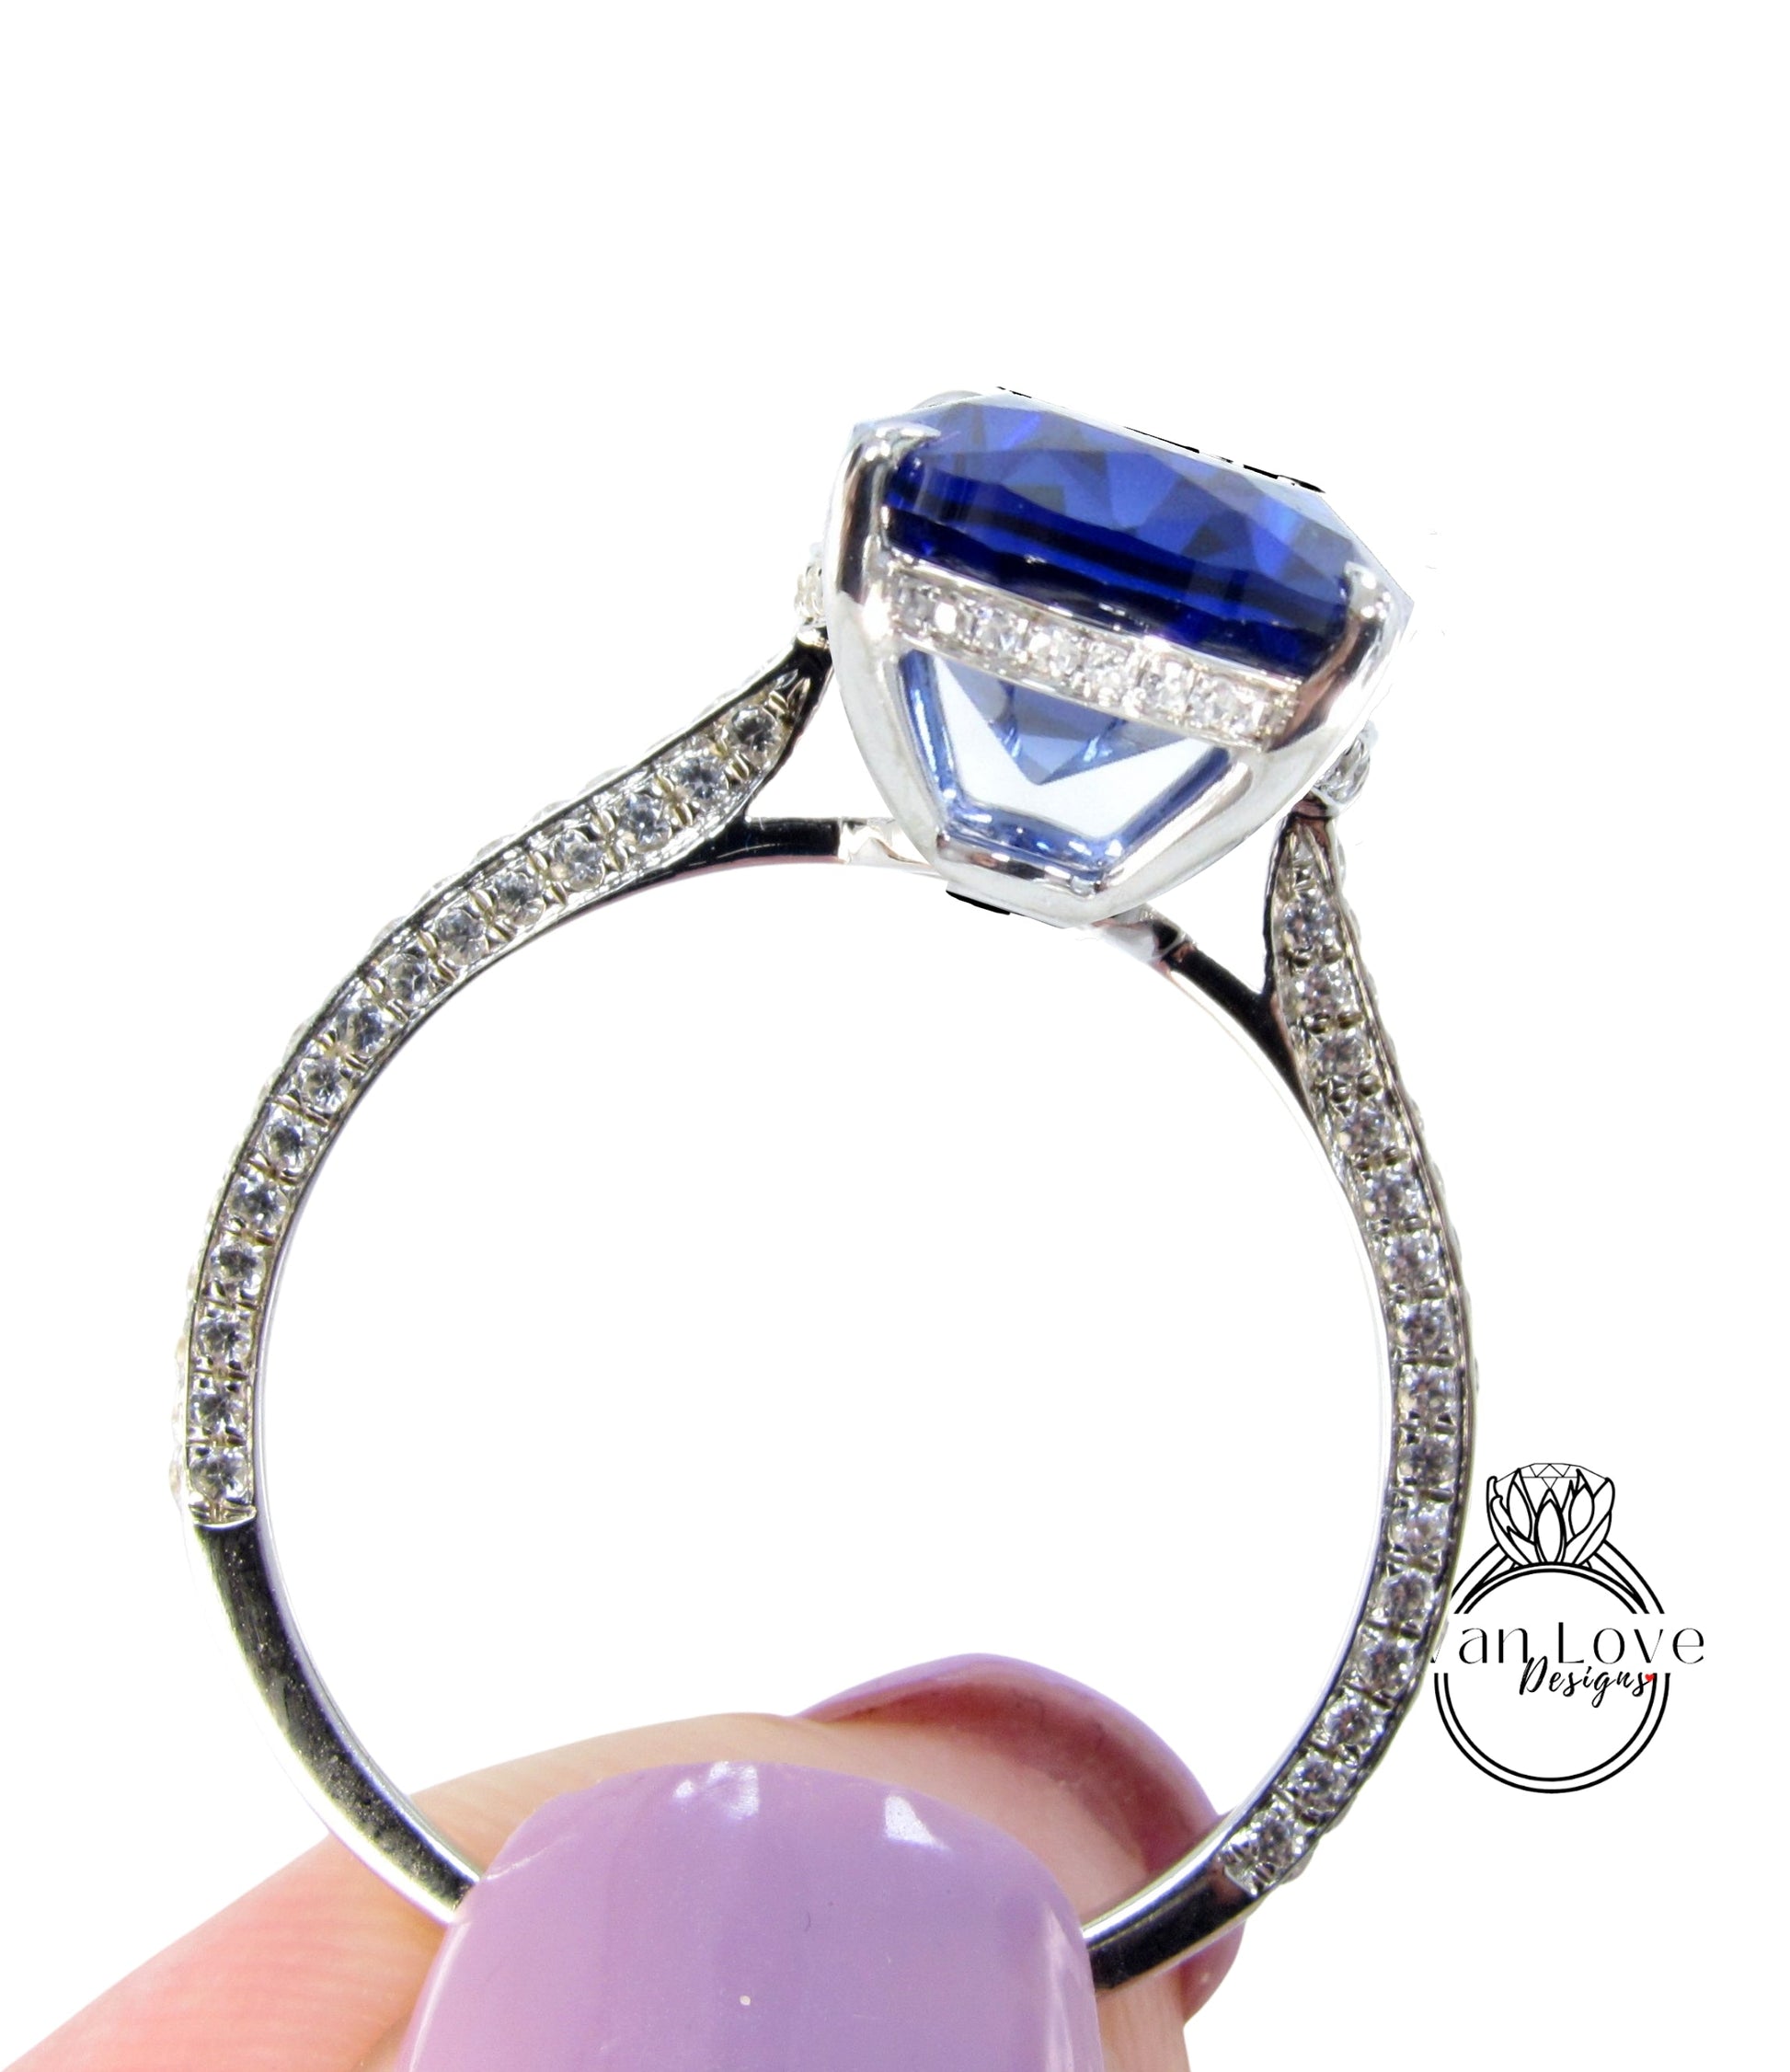 Oval Cut Blue Sapphire Engagement Ring in 14k/18k Rose White Gold, Elongated Oval Diamond Ring, Celebrity Oval Engagement Ring, 3 sided Bridal Band Ring Wan Love Designs